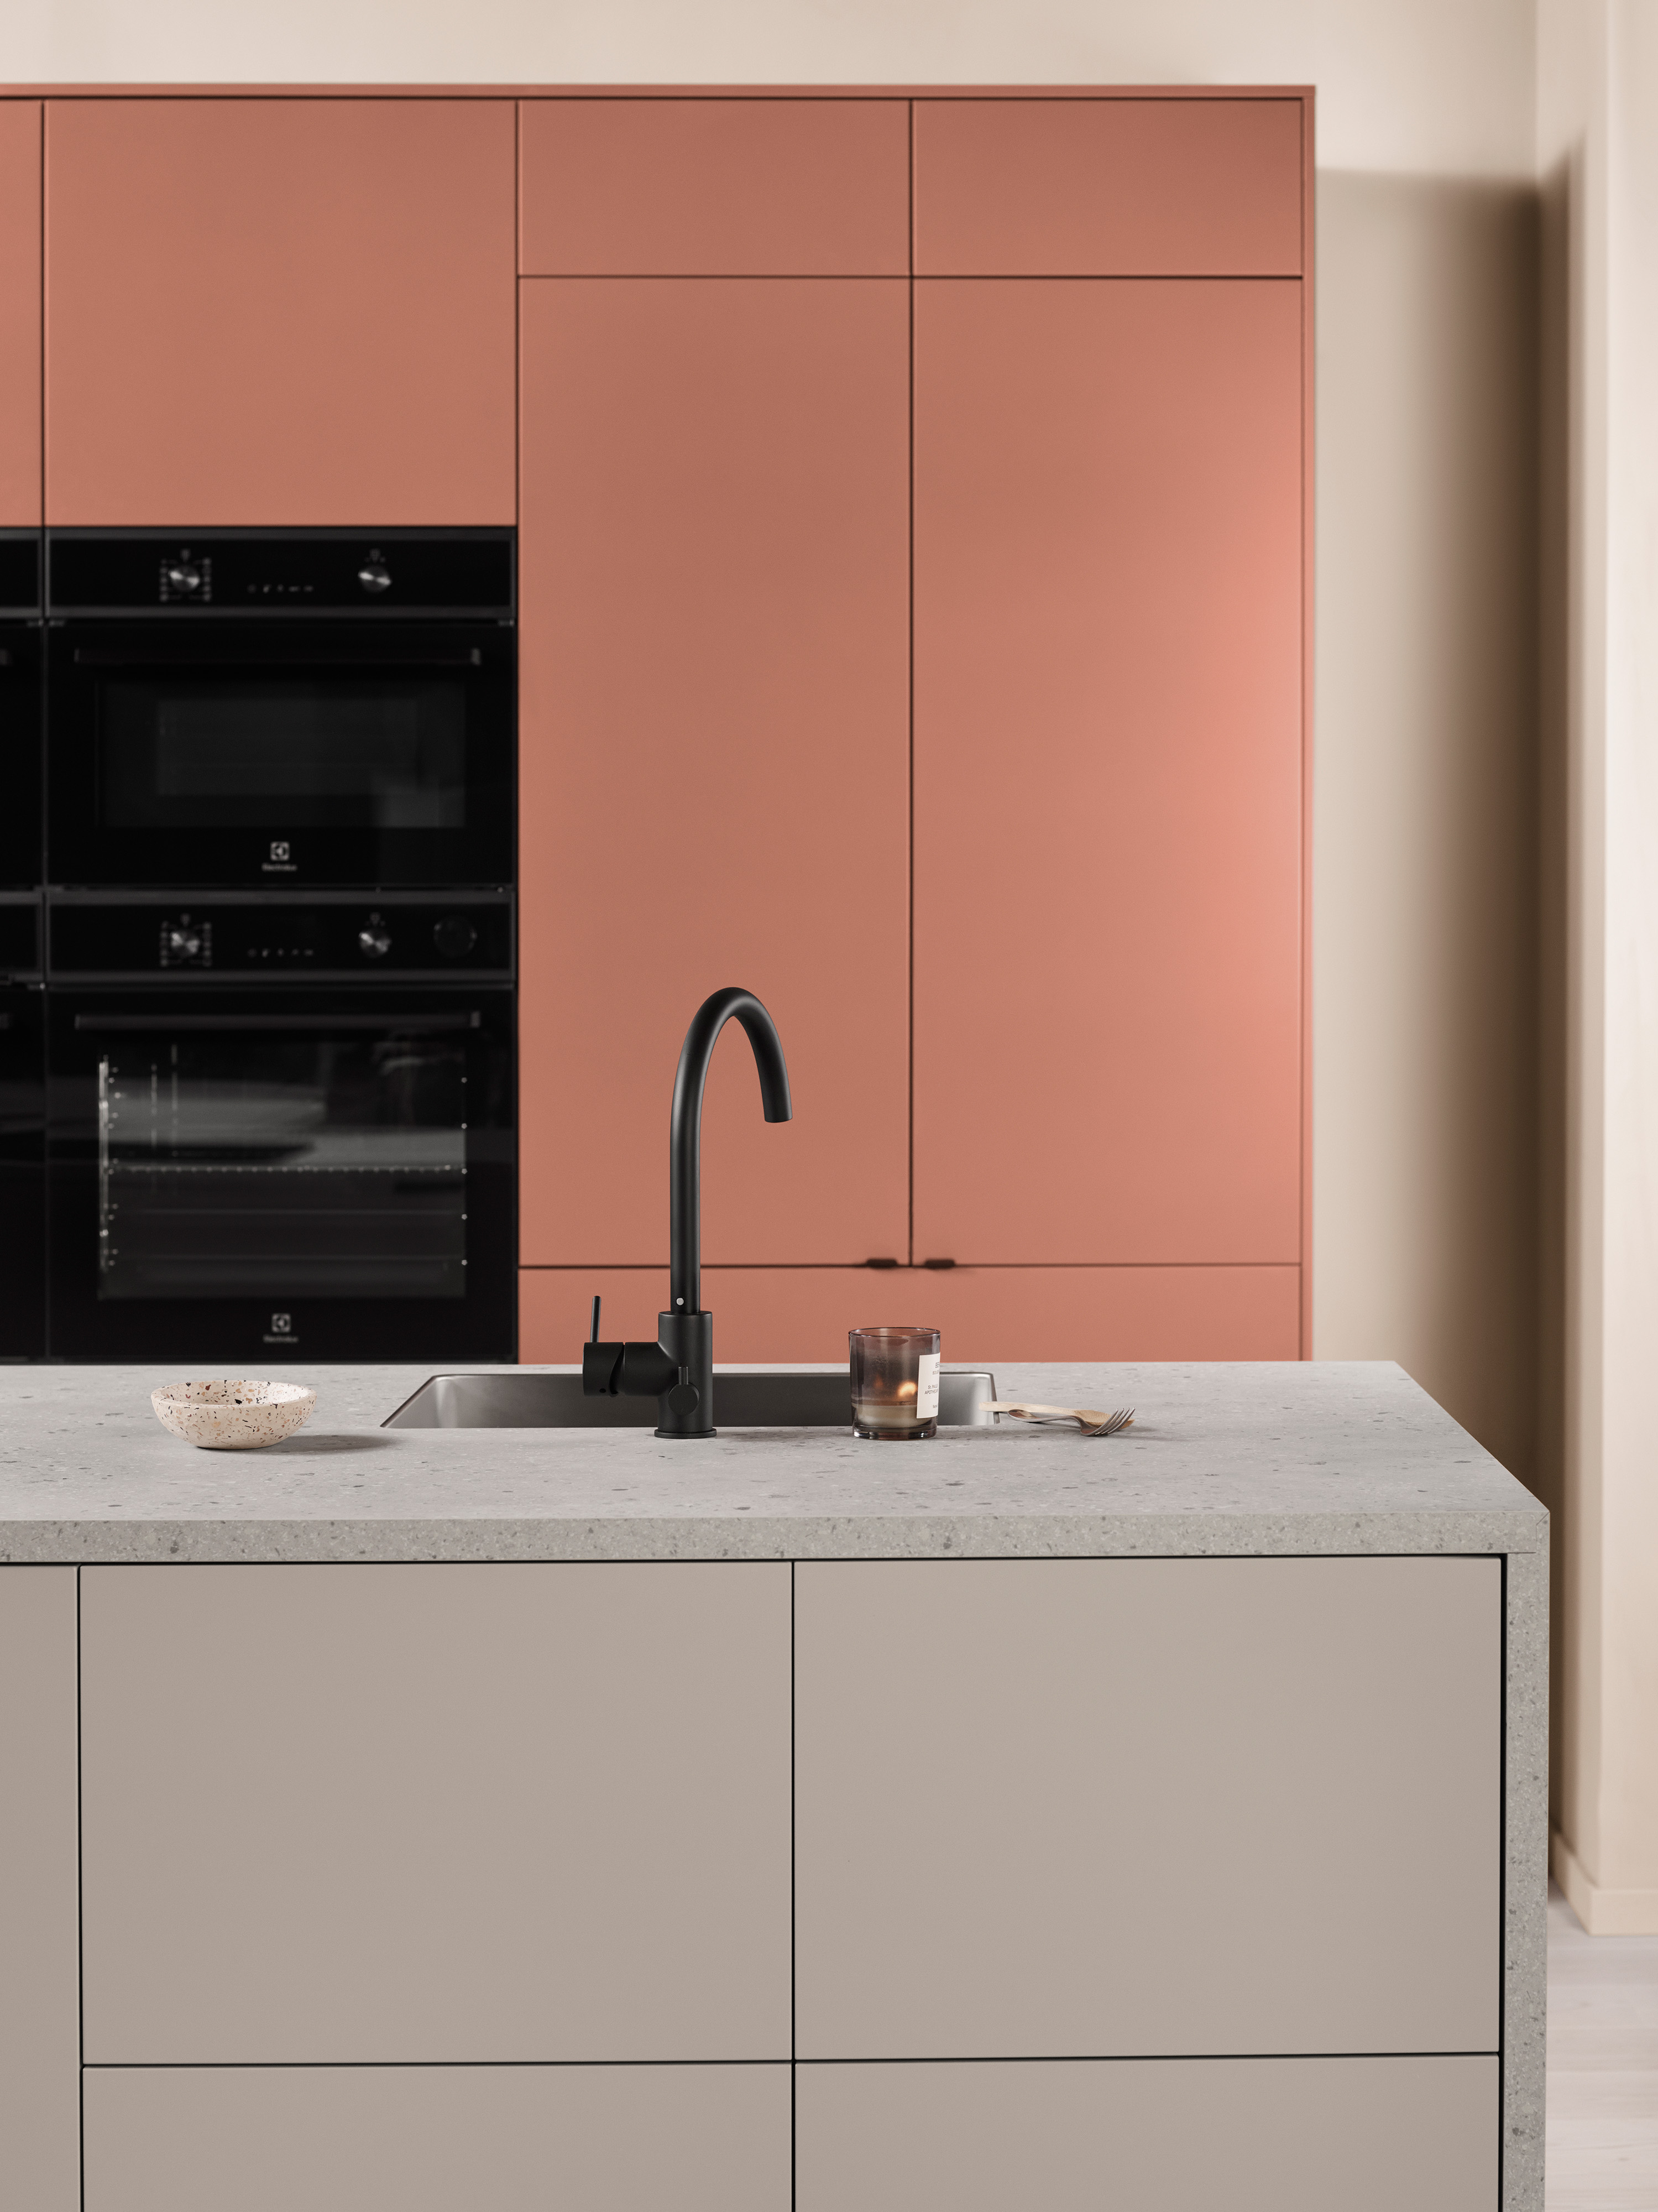 Image collection - Epoq kitchen without handles 